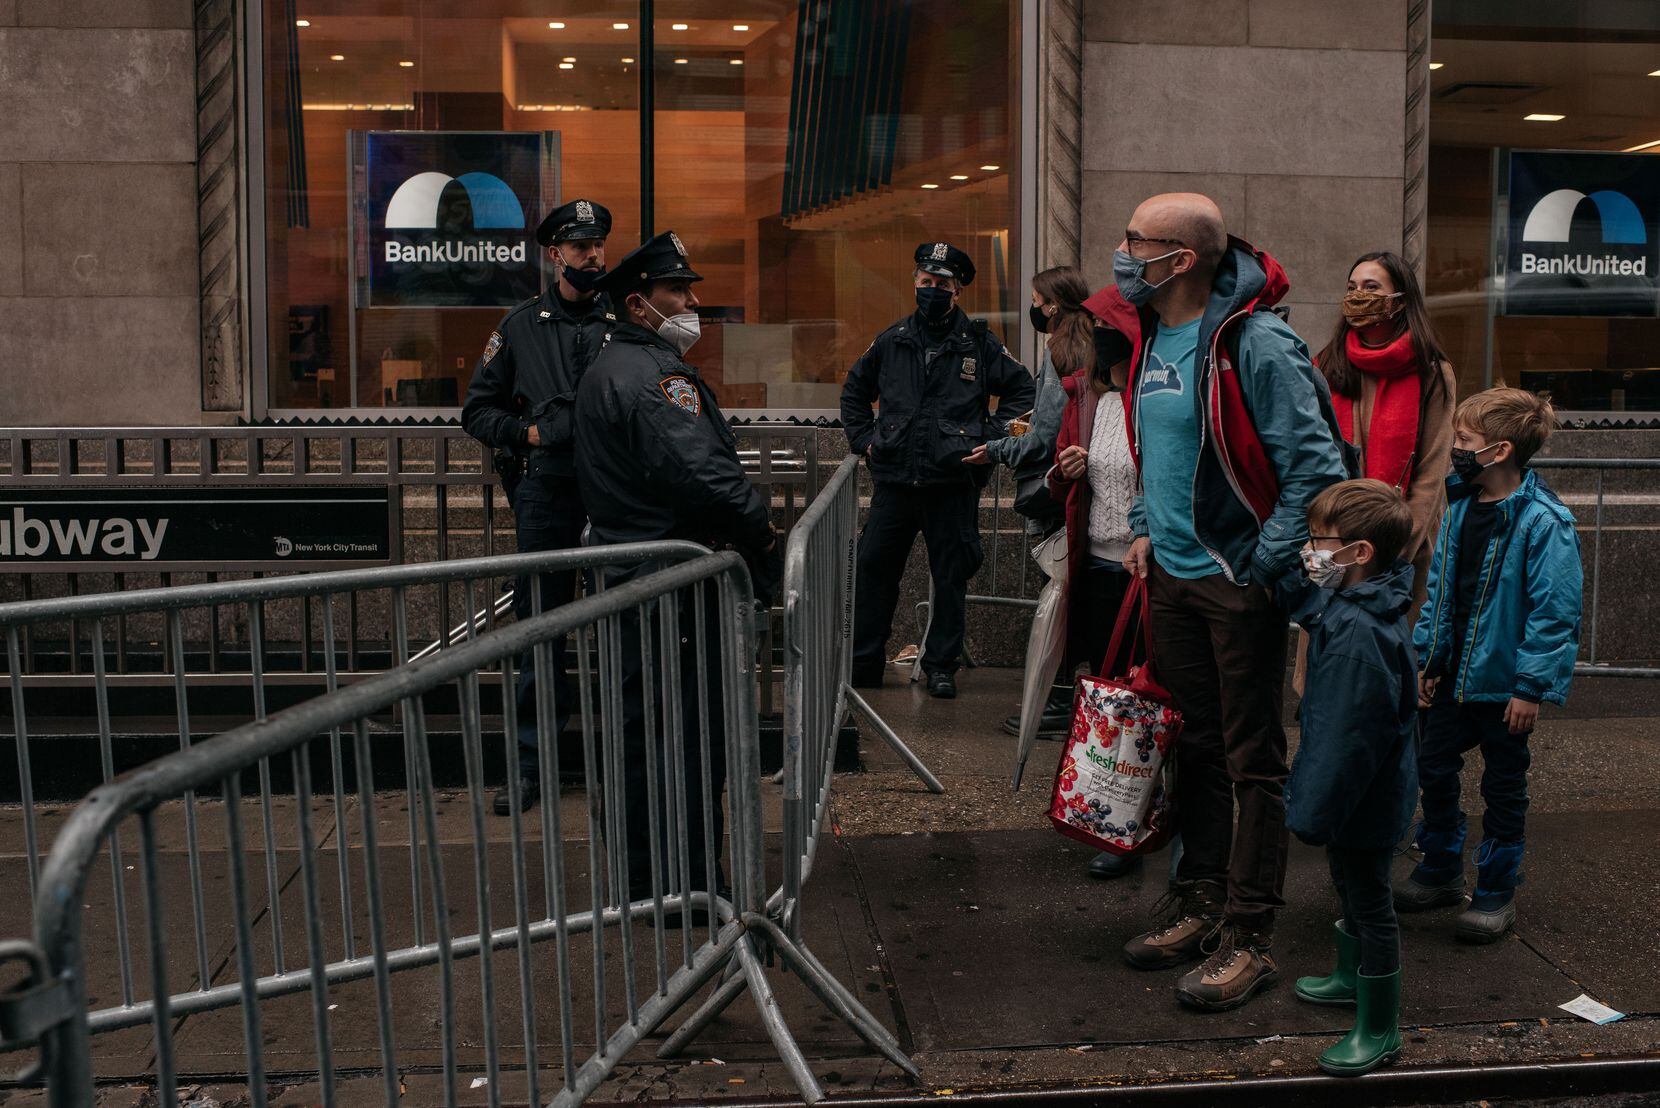 A family is stopped at a New York police barricade shortly before the Macy's Thanksgiving Day Parade in New York on Thursday.